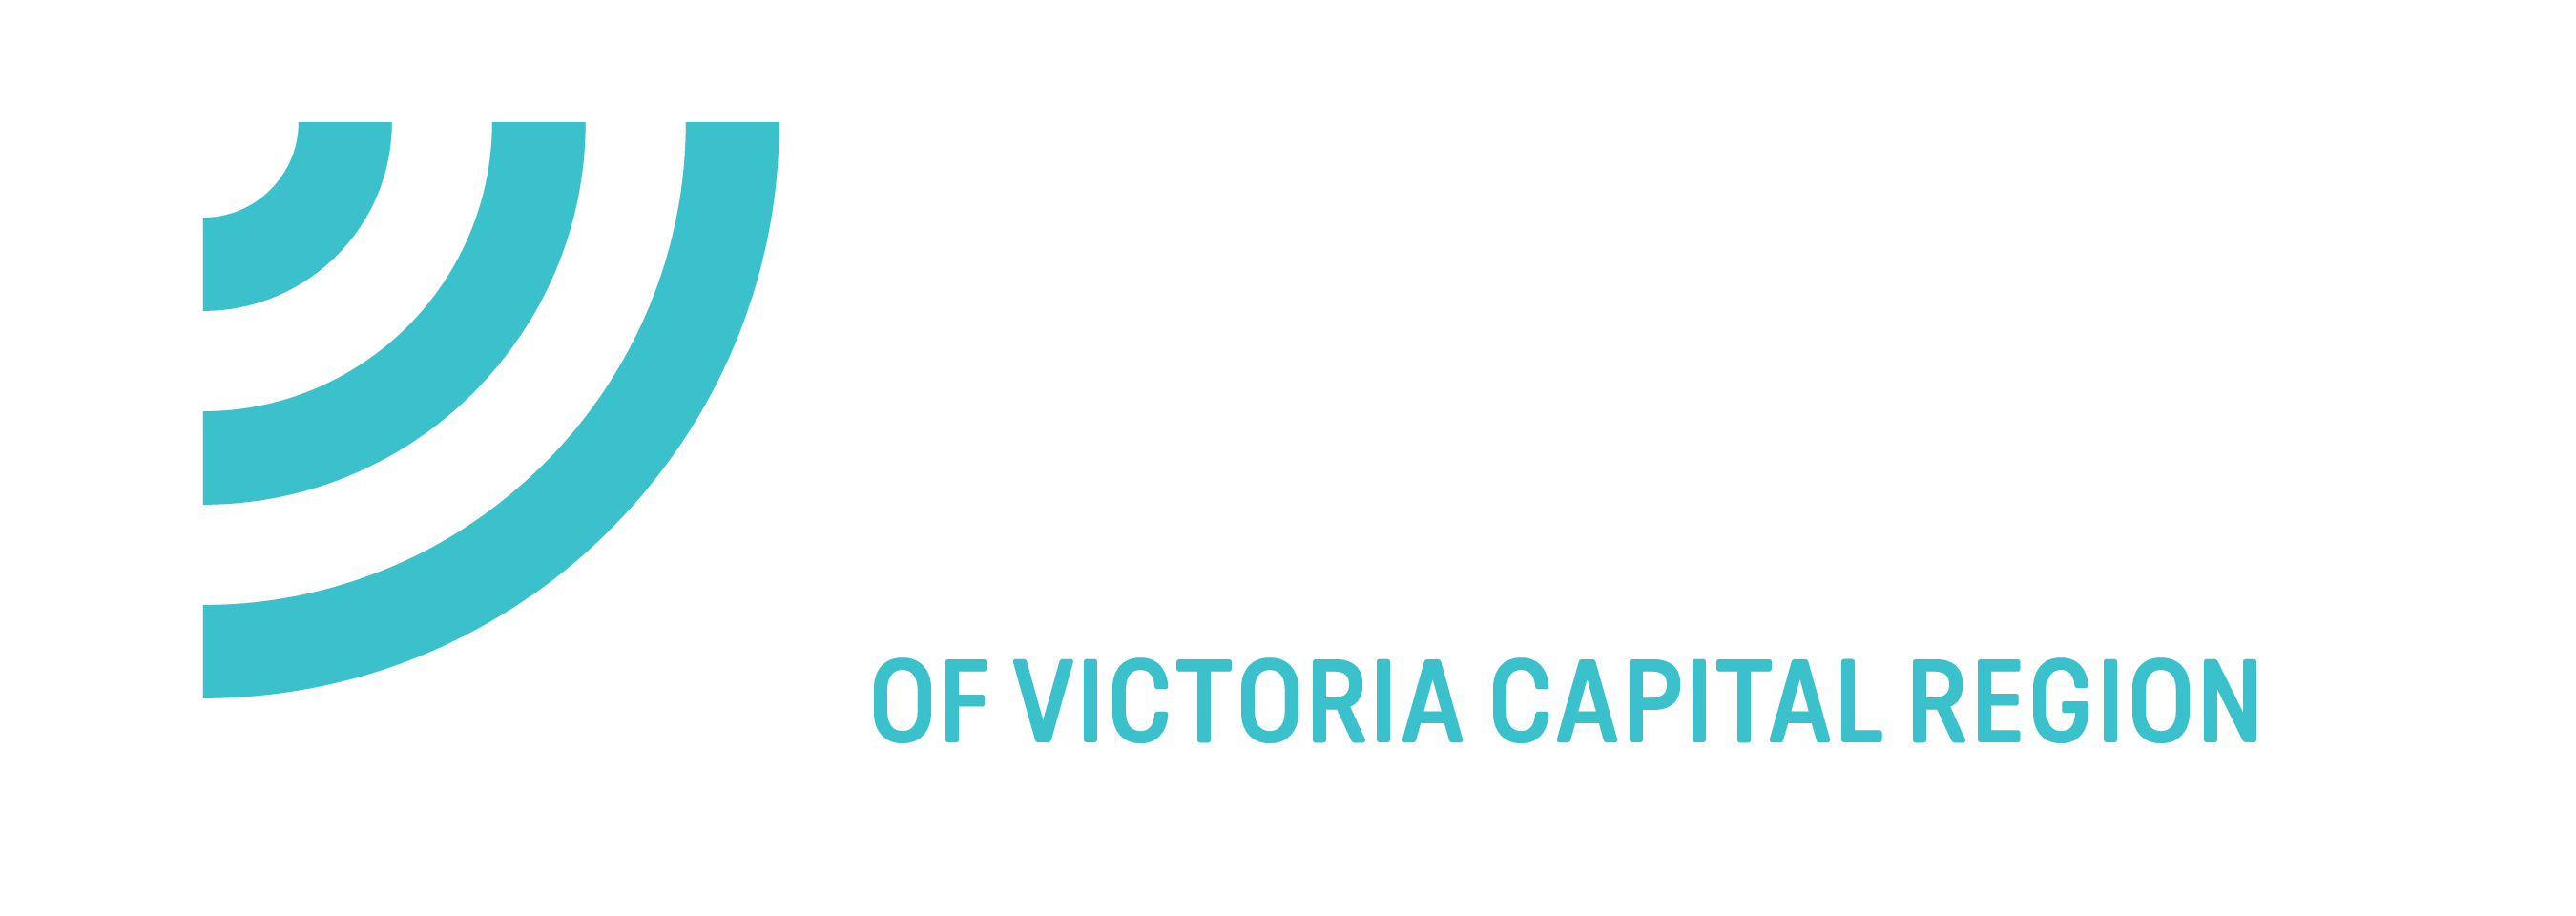 Informed Consent/Media Consent for In-School Mentoring Programs - Big Brothers Big Sisters of Victoria Capital Region